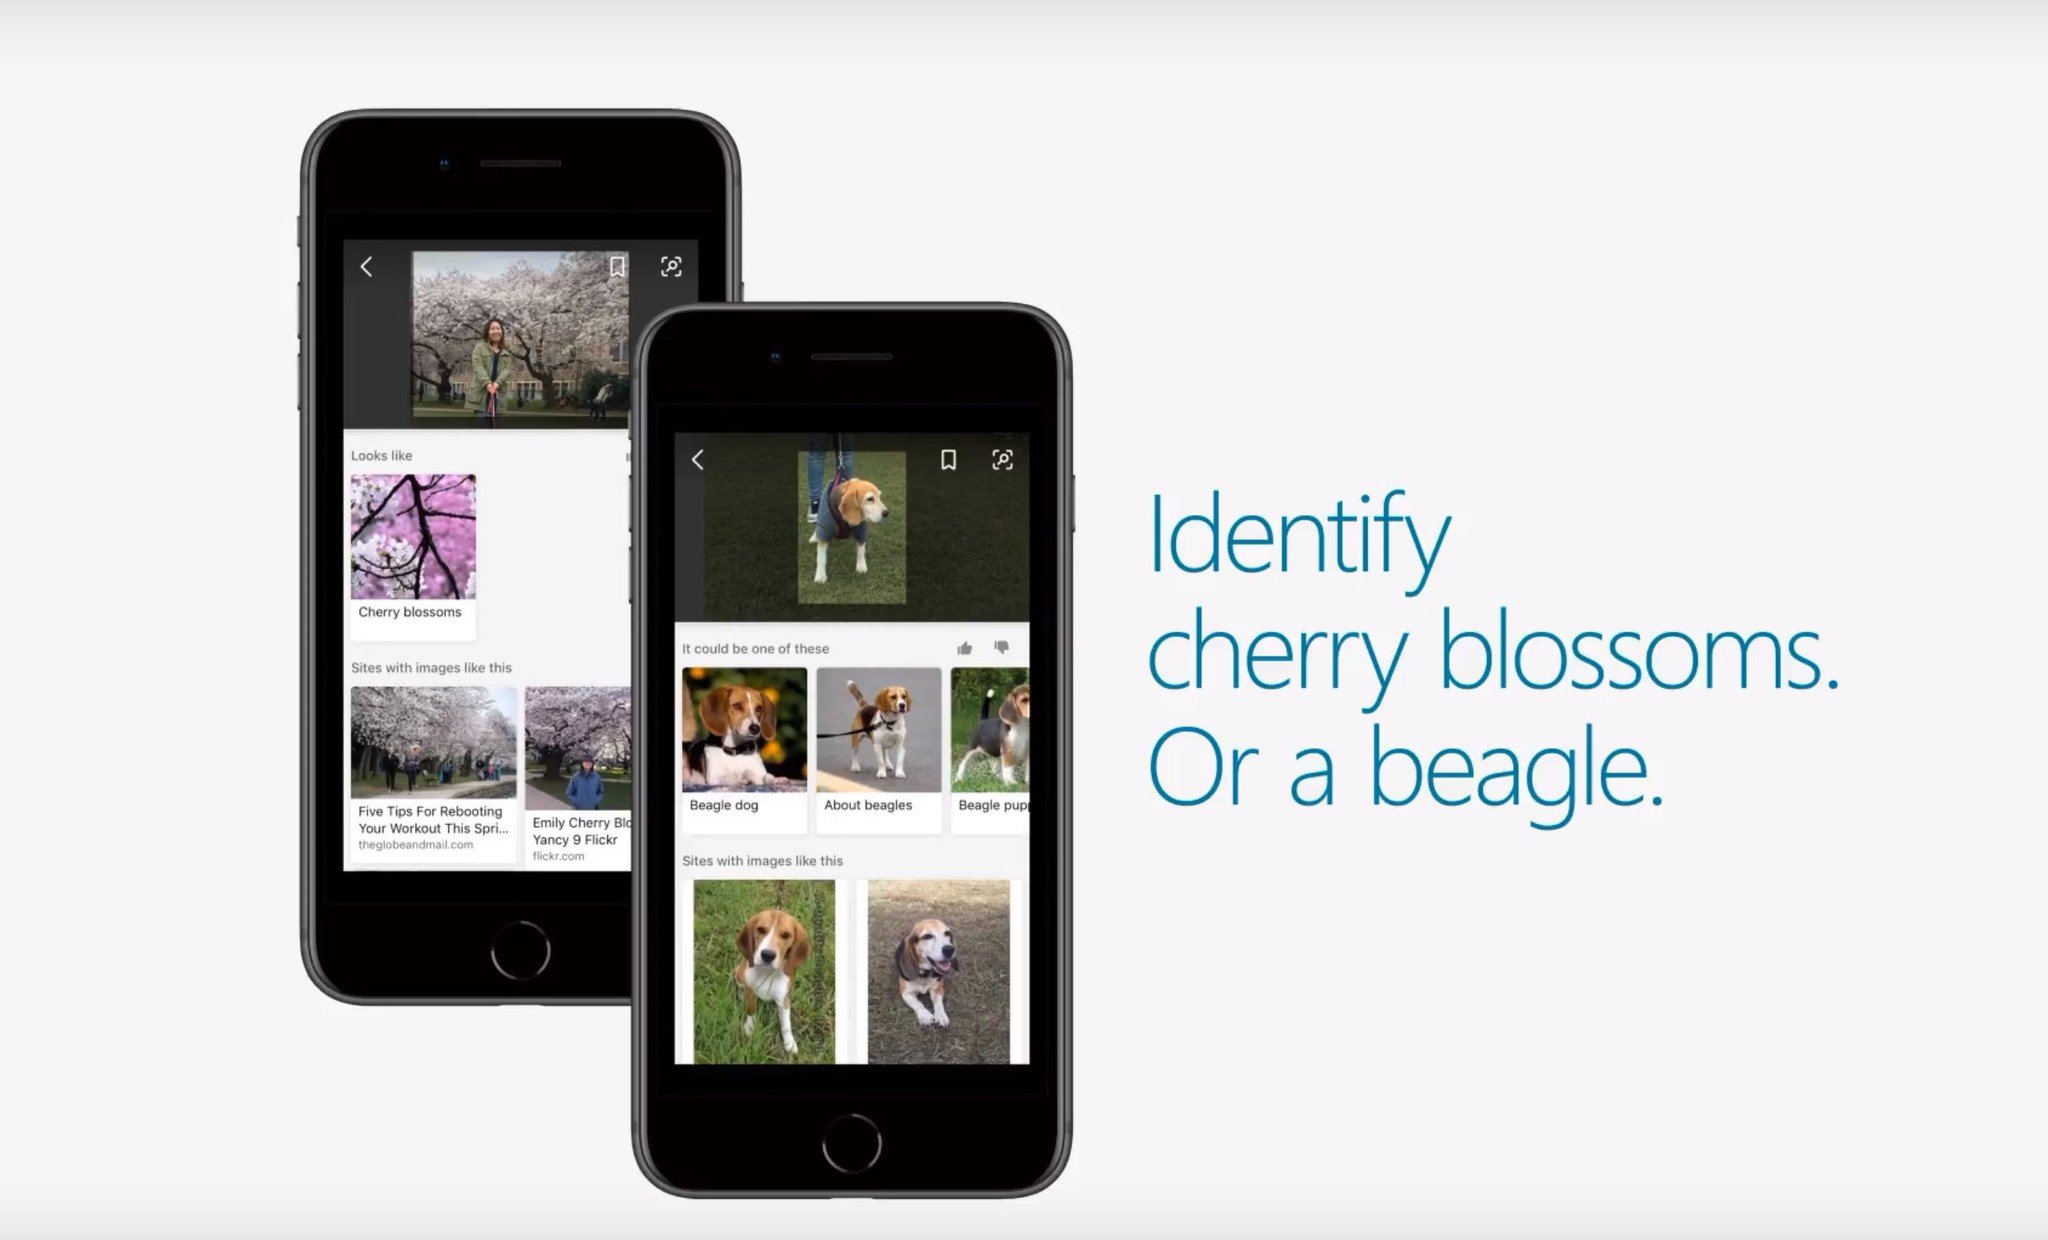 Microsoft launches new Bing visual search features